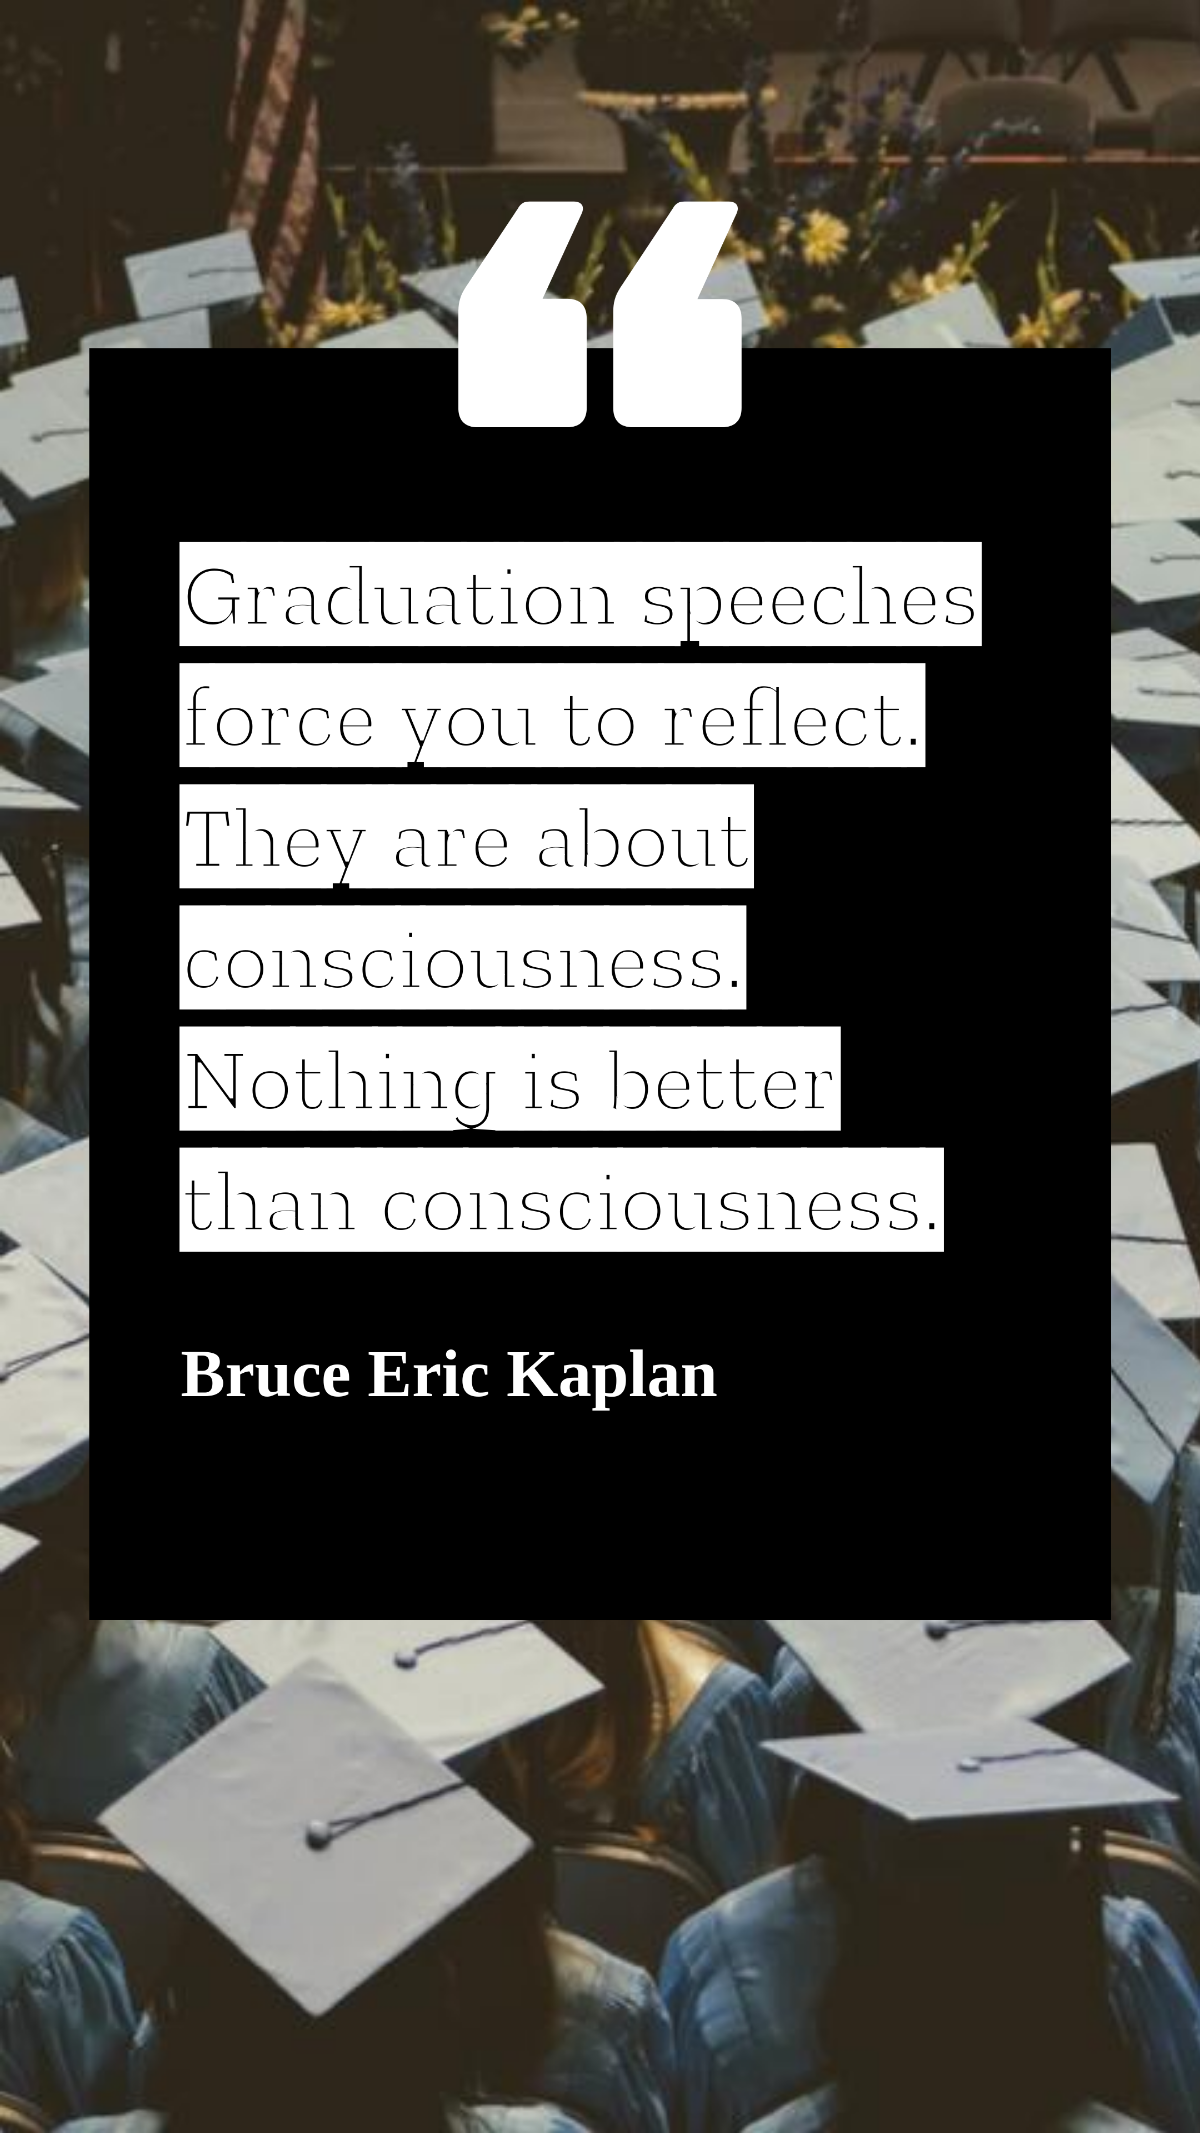 Bruce Eric Kaplan - Graduation speeches force you to reflect. They are about consciousness. Nothing is better than consciousness. Template